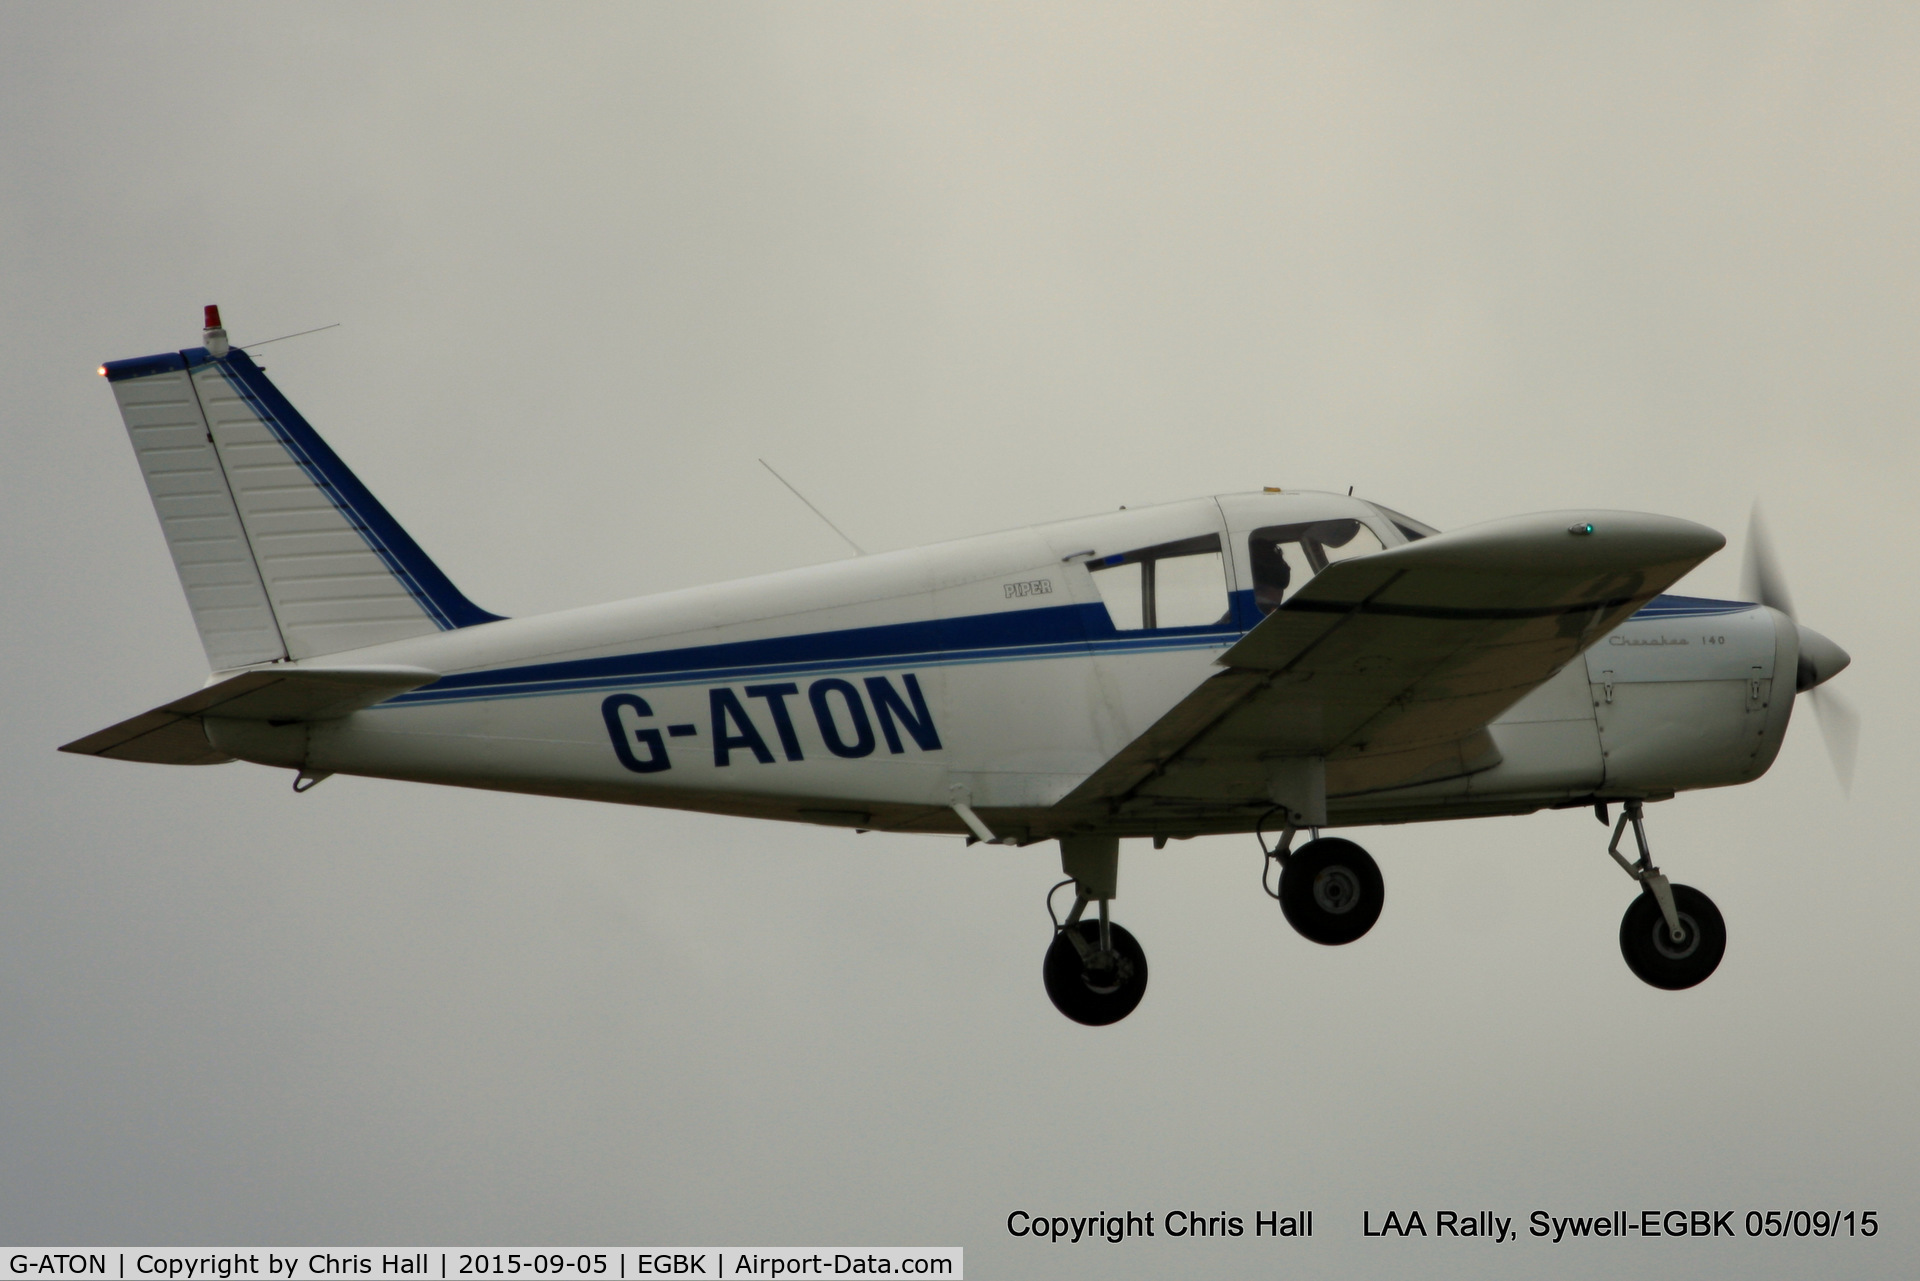 G-ATON, 1966 Piper PA-28-140 Cherokee C/N 28-21654, at the LAA Rally 2015, Sywell